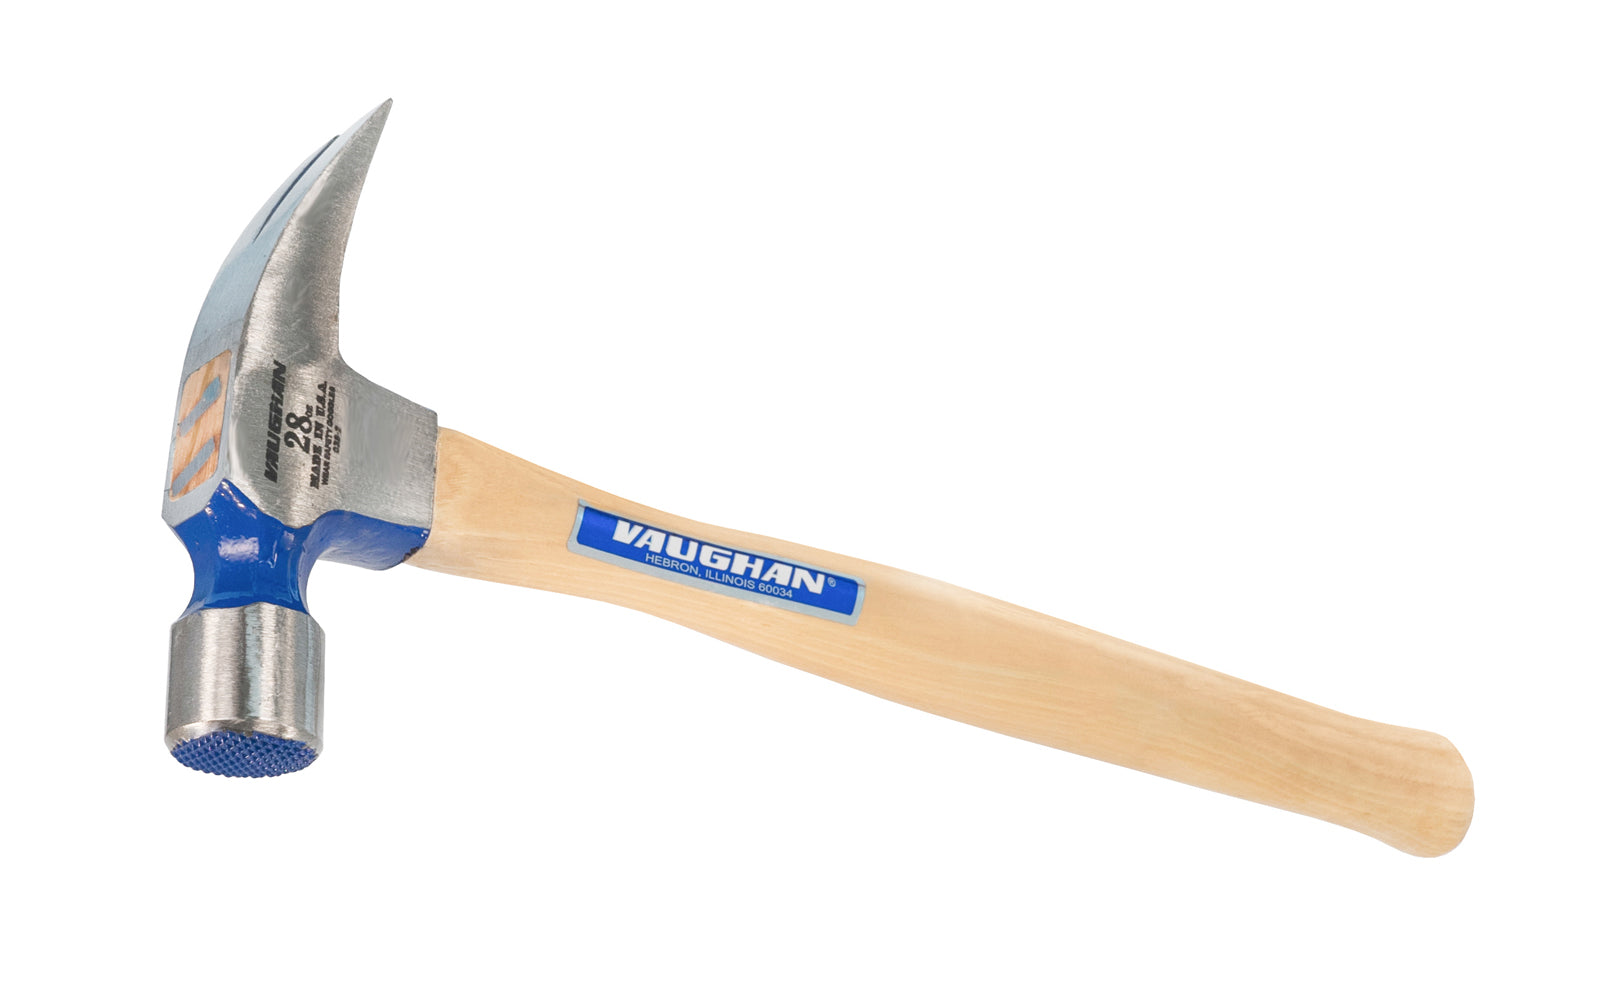 This 28 oz Vaughan 606M framing hammer is an extra-heavy framer designed to provide excellent overall balance. Mill waffle face. Rust-resistant powder coat finish. Octagonal Neck. Hickory hardwood handle. 28 oz head weight. Made in USA. 051218106206. Model 606M. Serrated Face Rip Hammer.